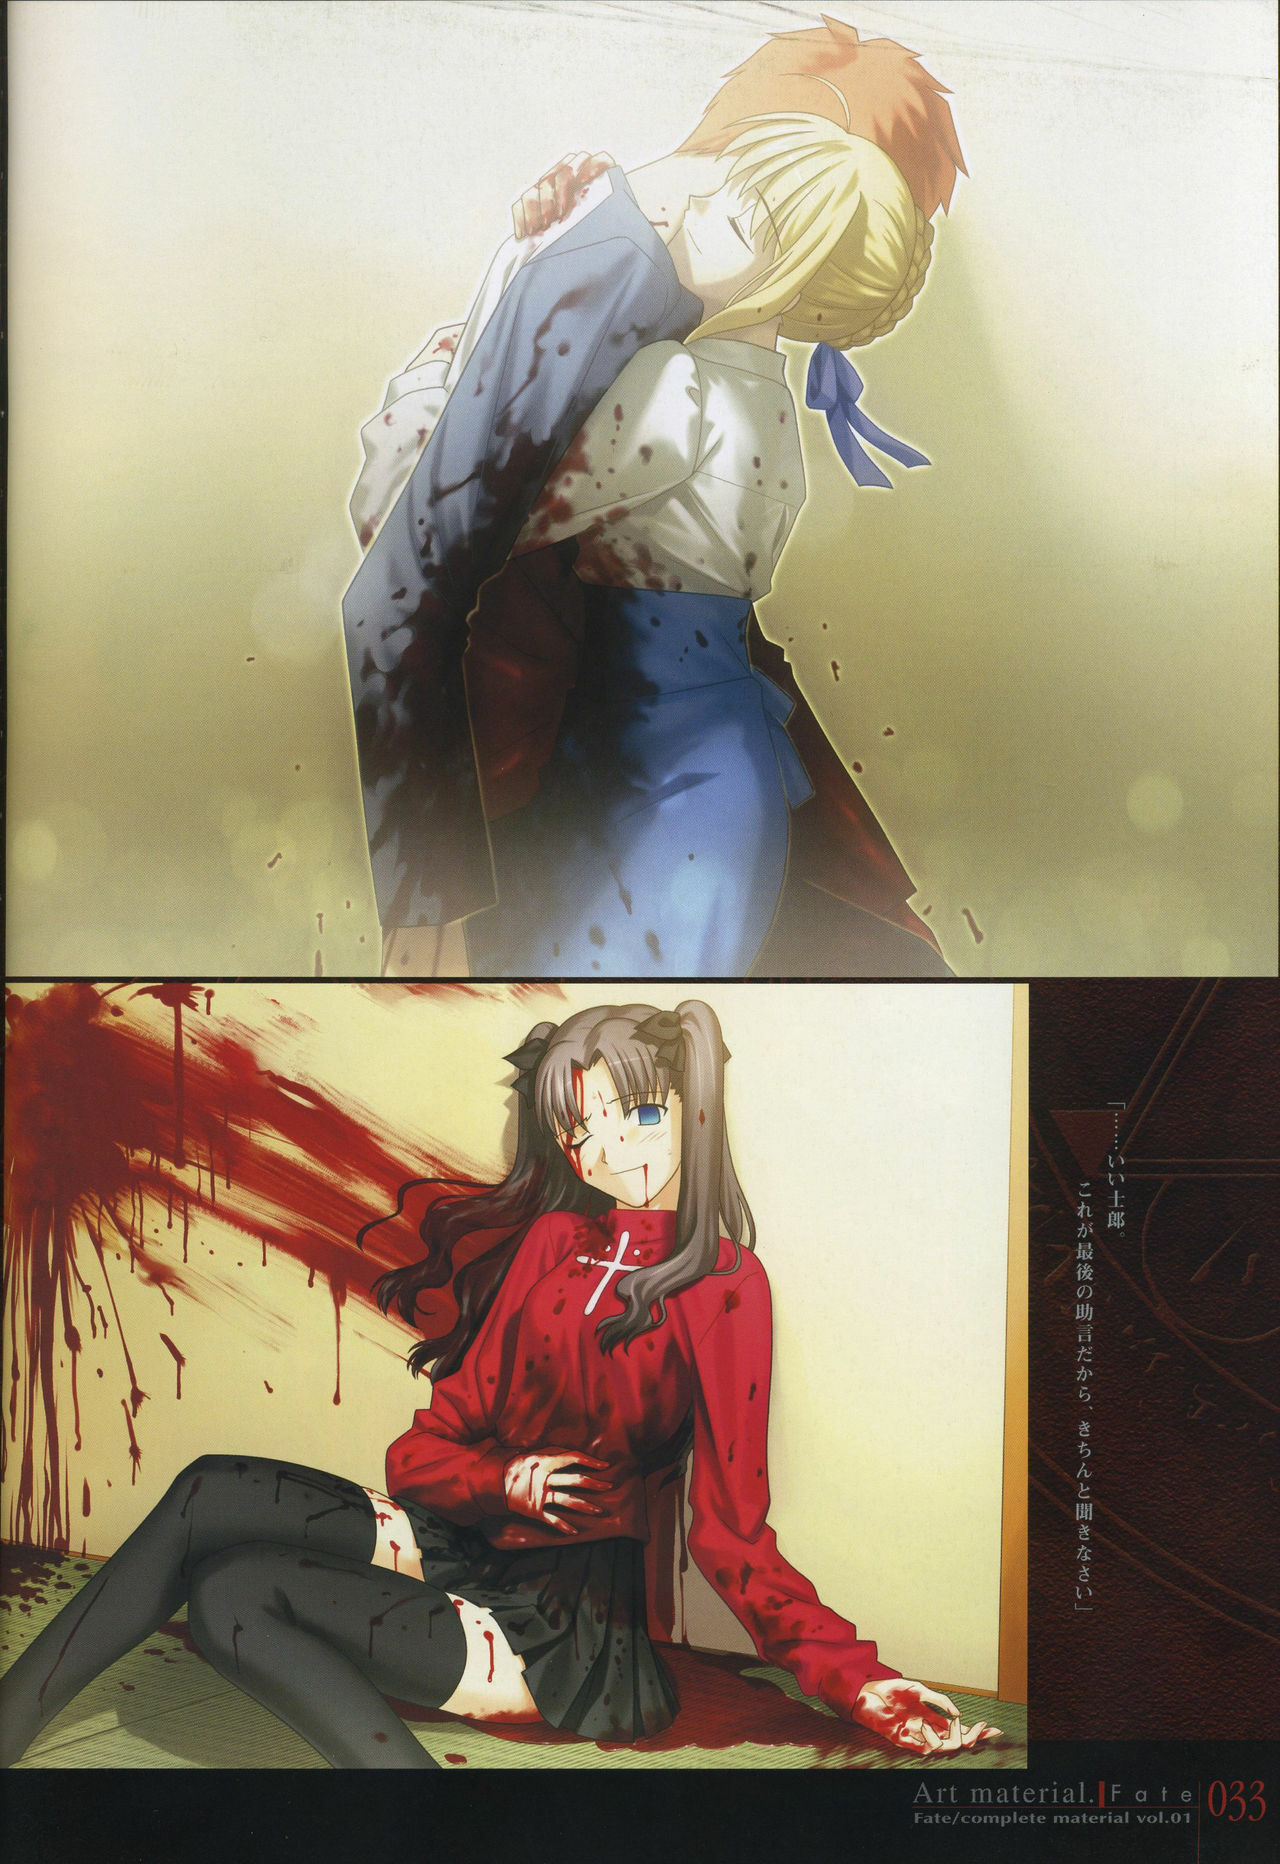 [Type-Moon] Fate/complete material I - Art material. page 38 full